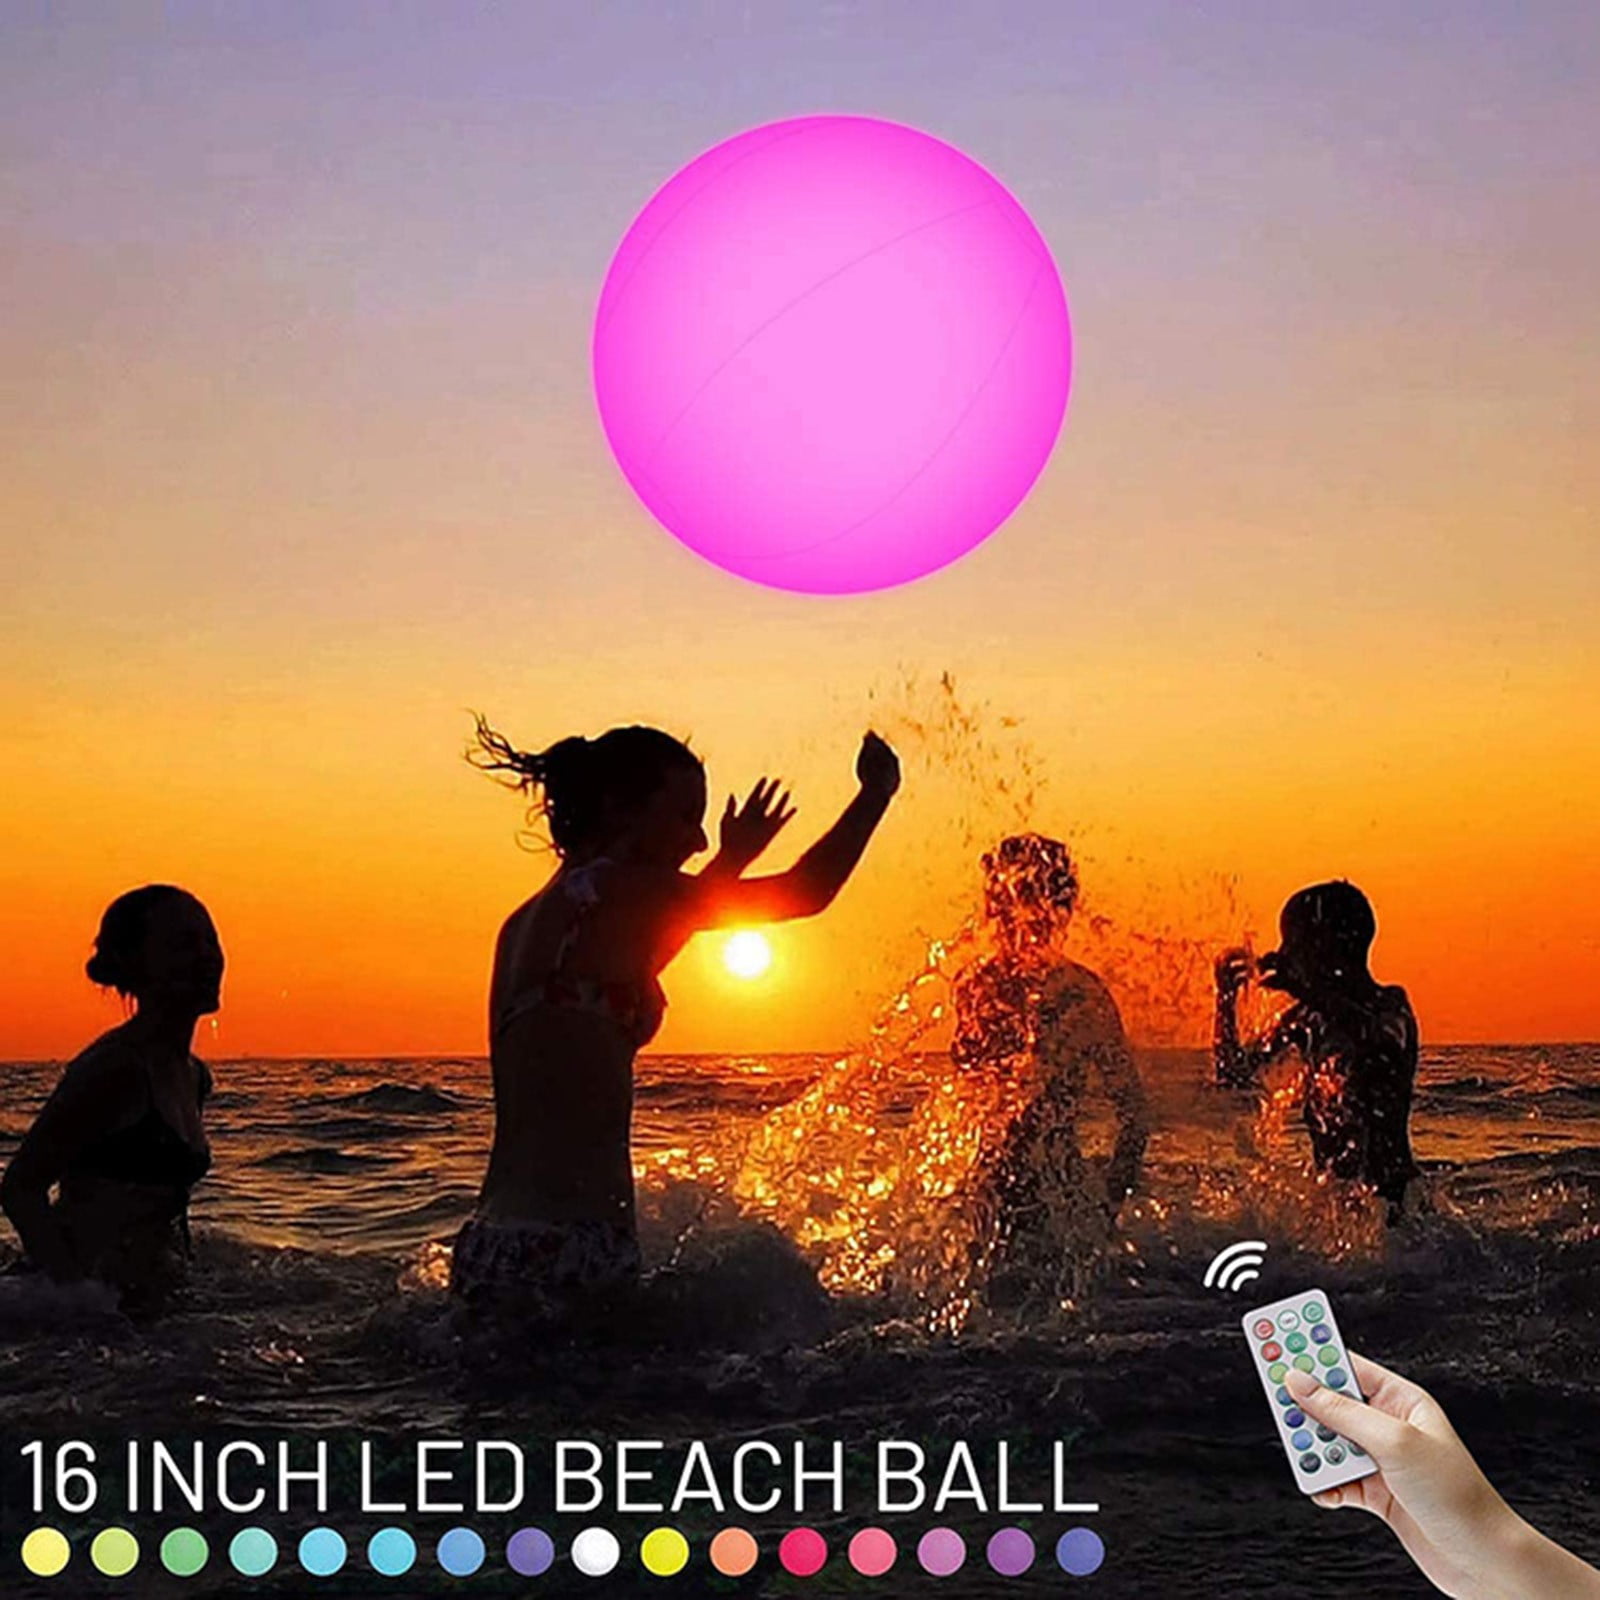 LED Light up Color Changing Waterproof Inflatable Beach Ball30 inchesFor B 